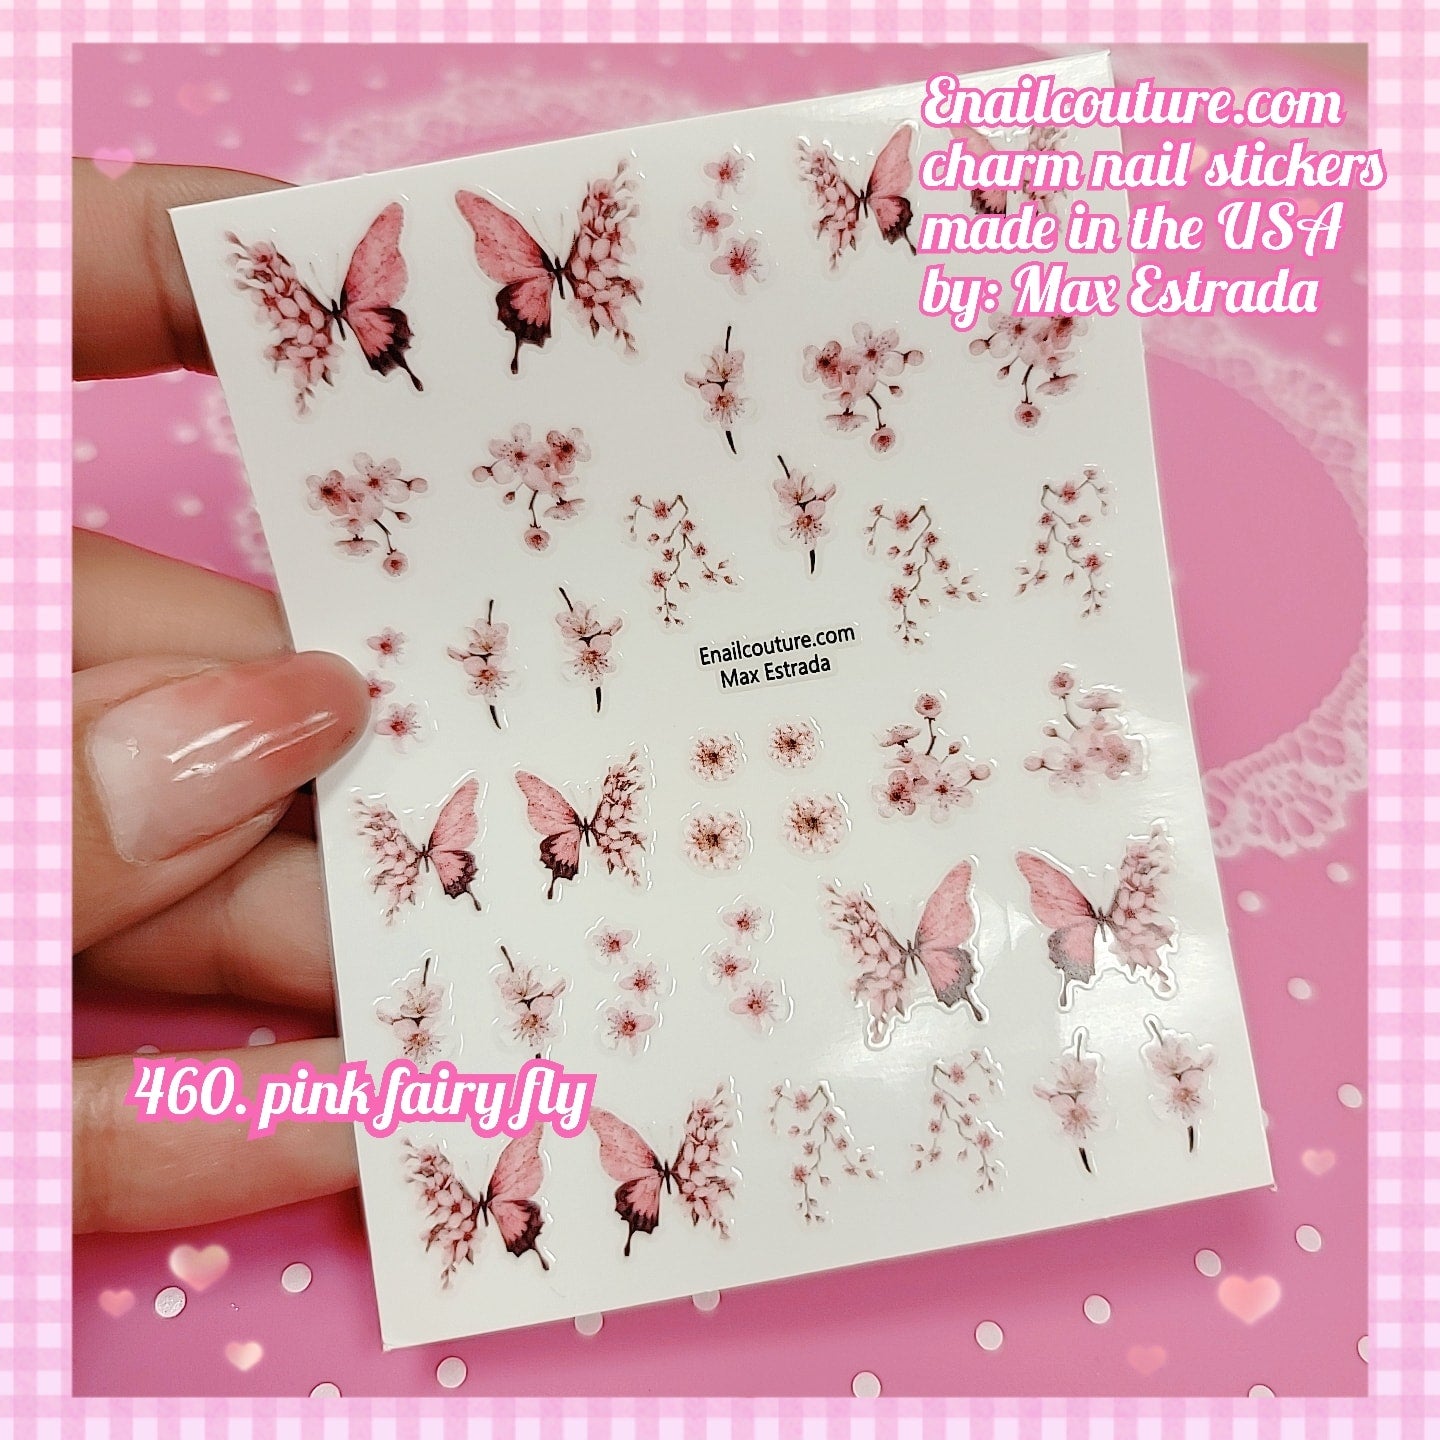 Charm Nail Sticker, Page 5 (flat & 3D Self-AdhesiveNail Decals Leaf Nail Art Stickers Colorful Mixed Nail Decorations)